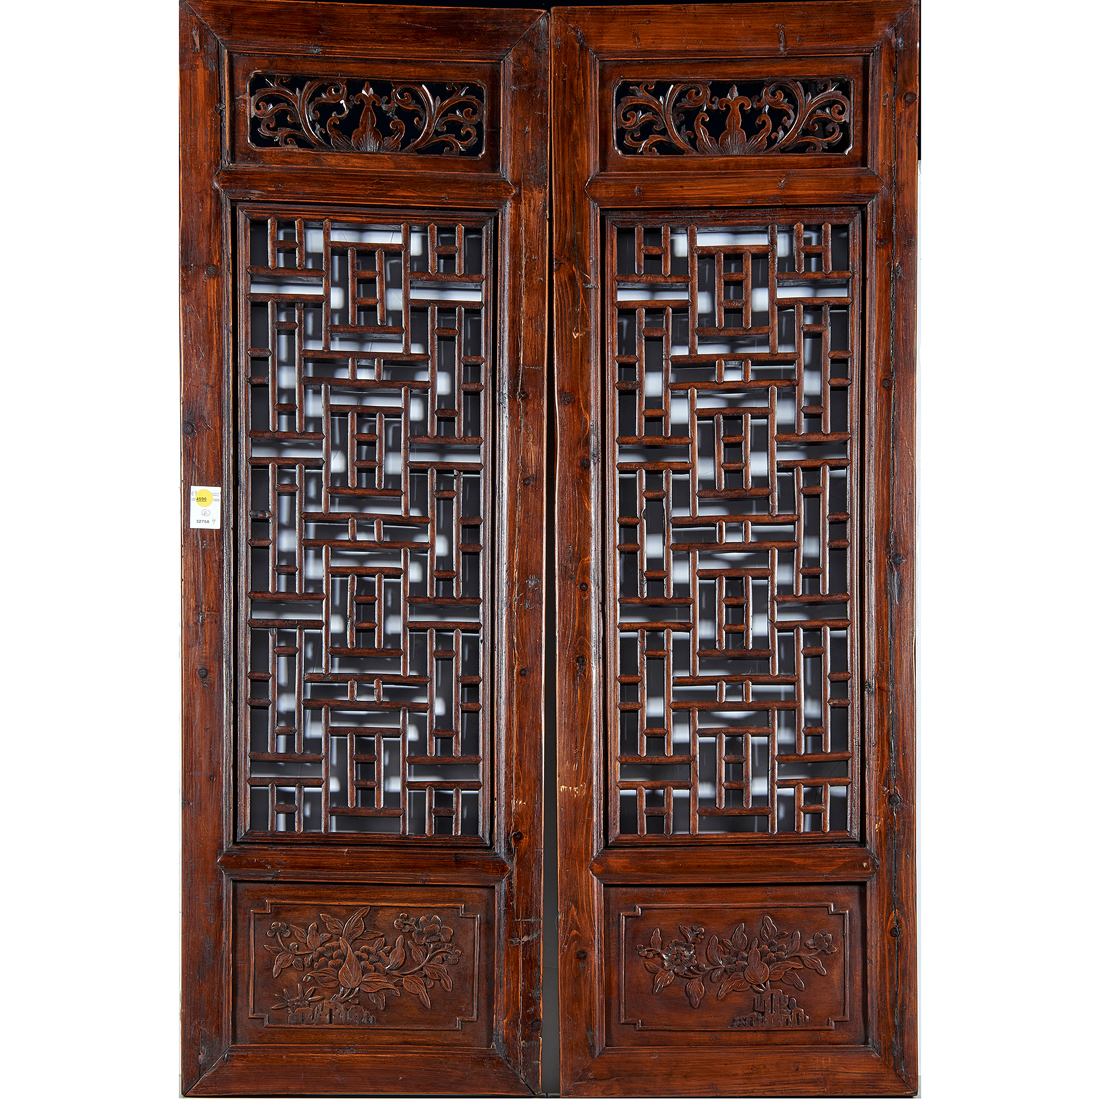 PAIR OF CHINESE CARVED WOOD WINDOW 3a1f1e